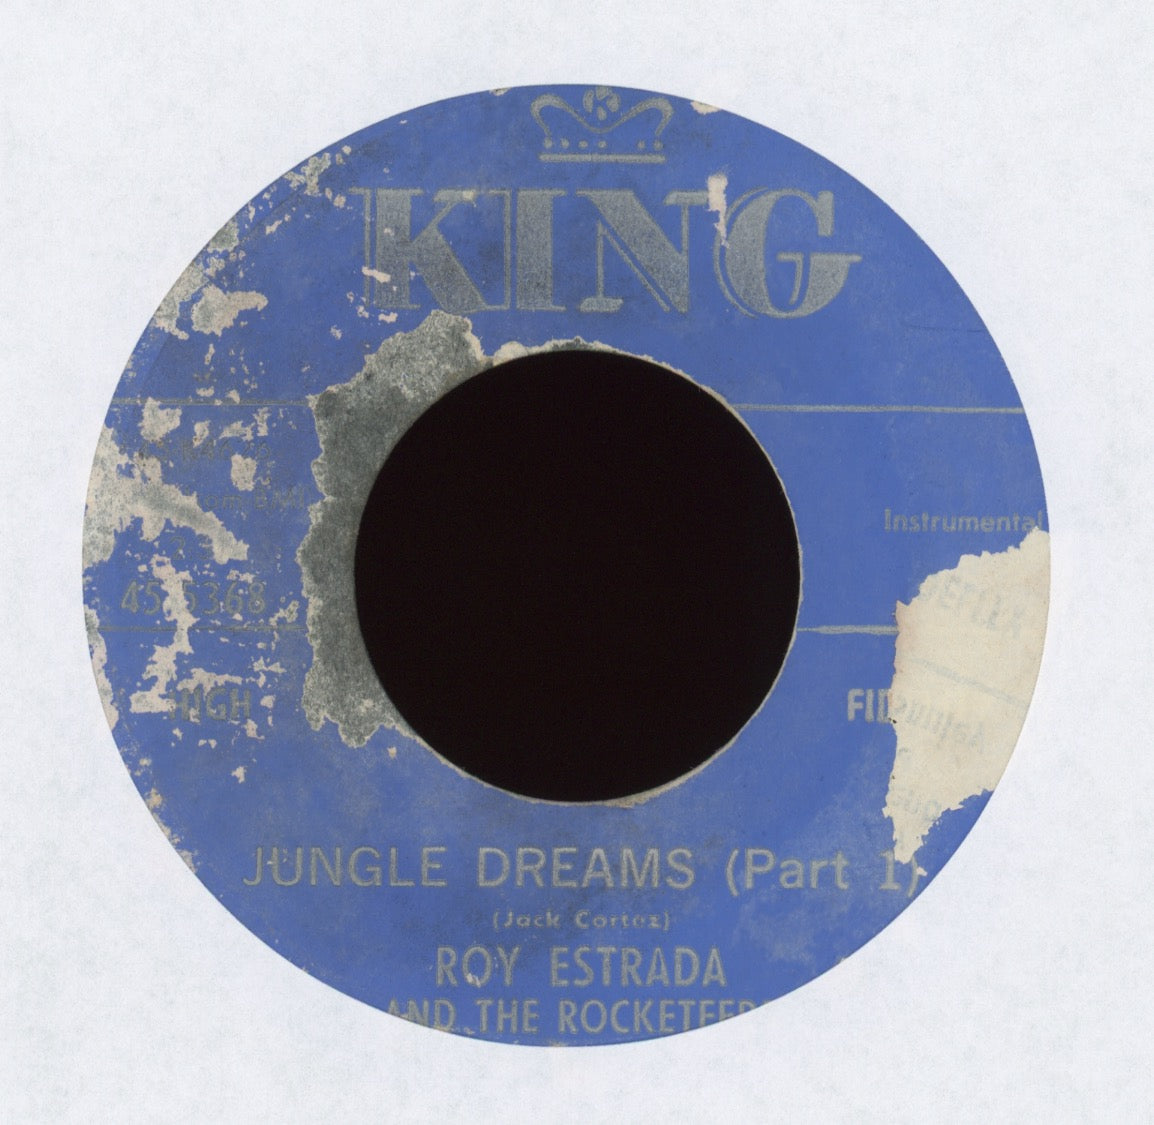 Roy Estrada And The Rocketeers - Jungle Dreams on King